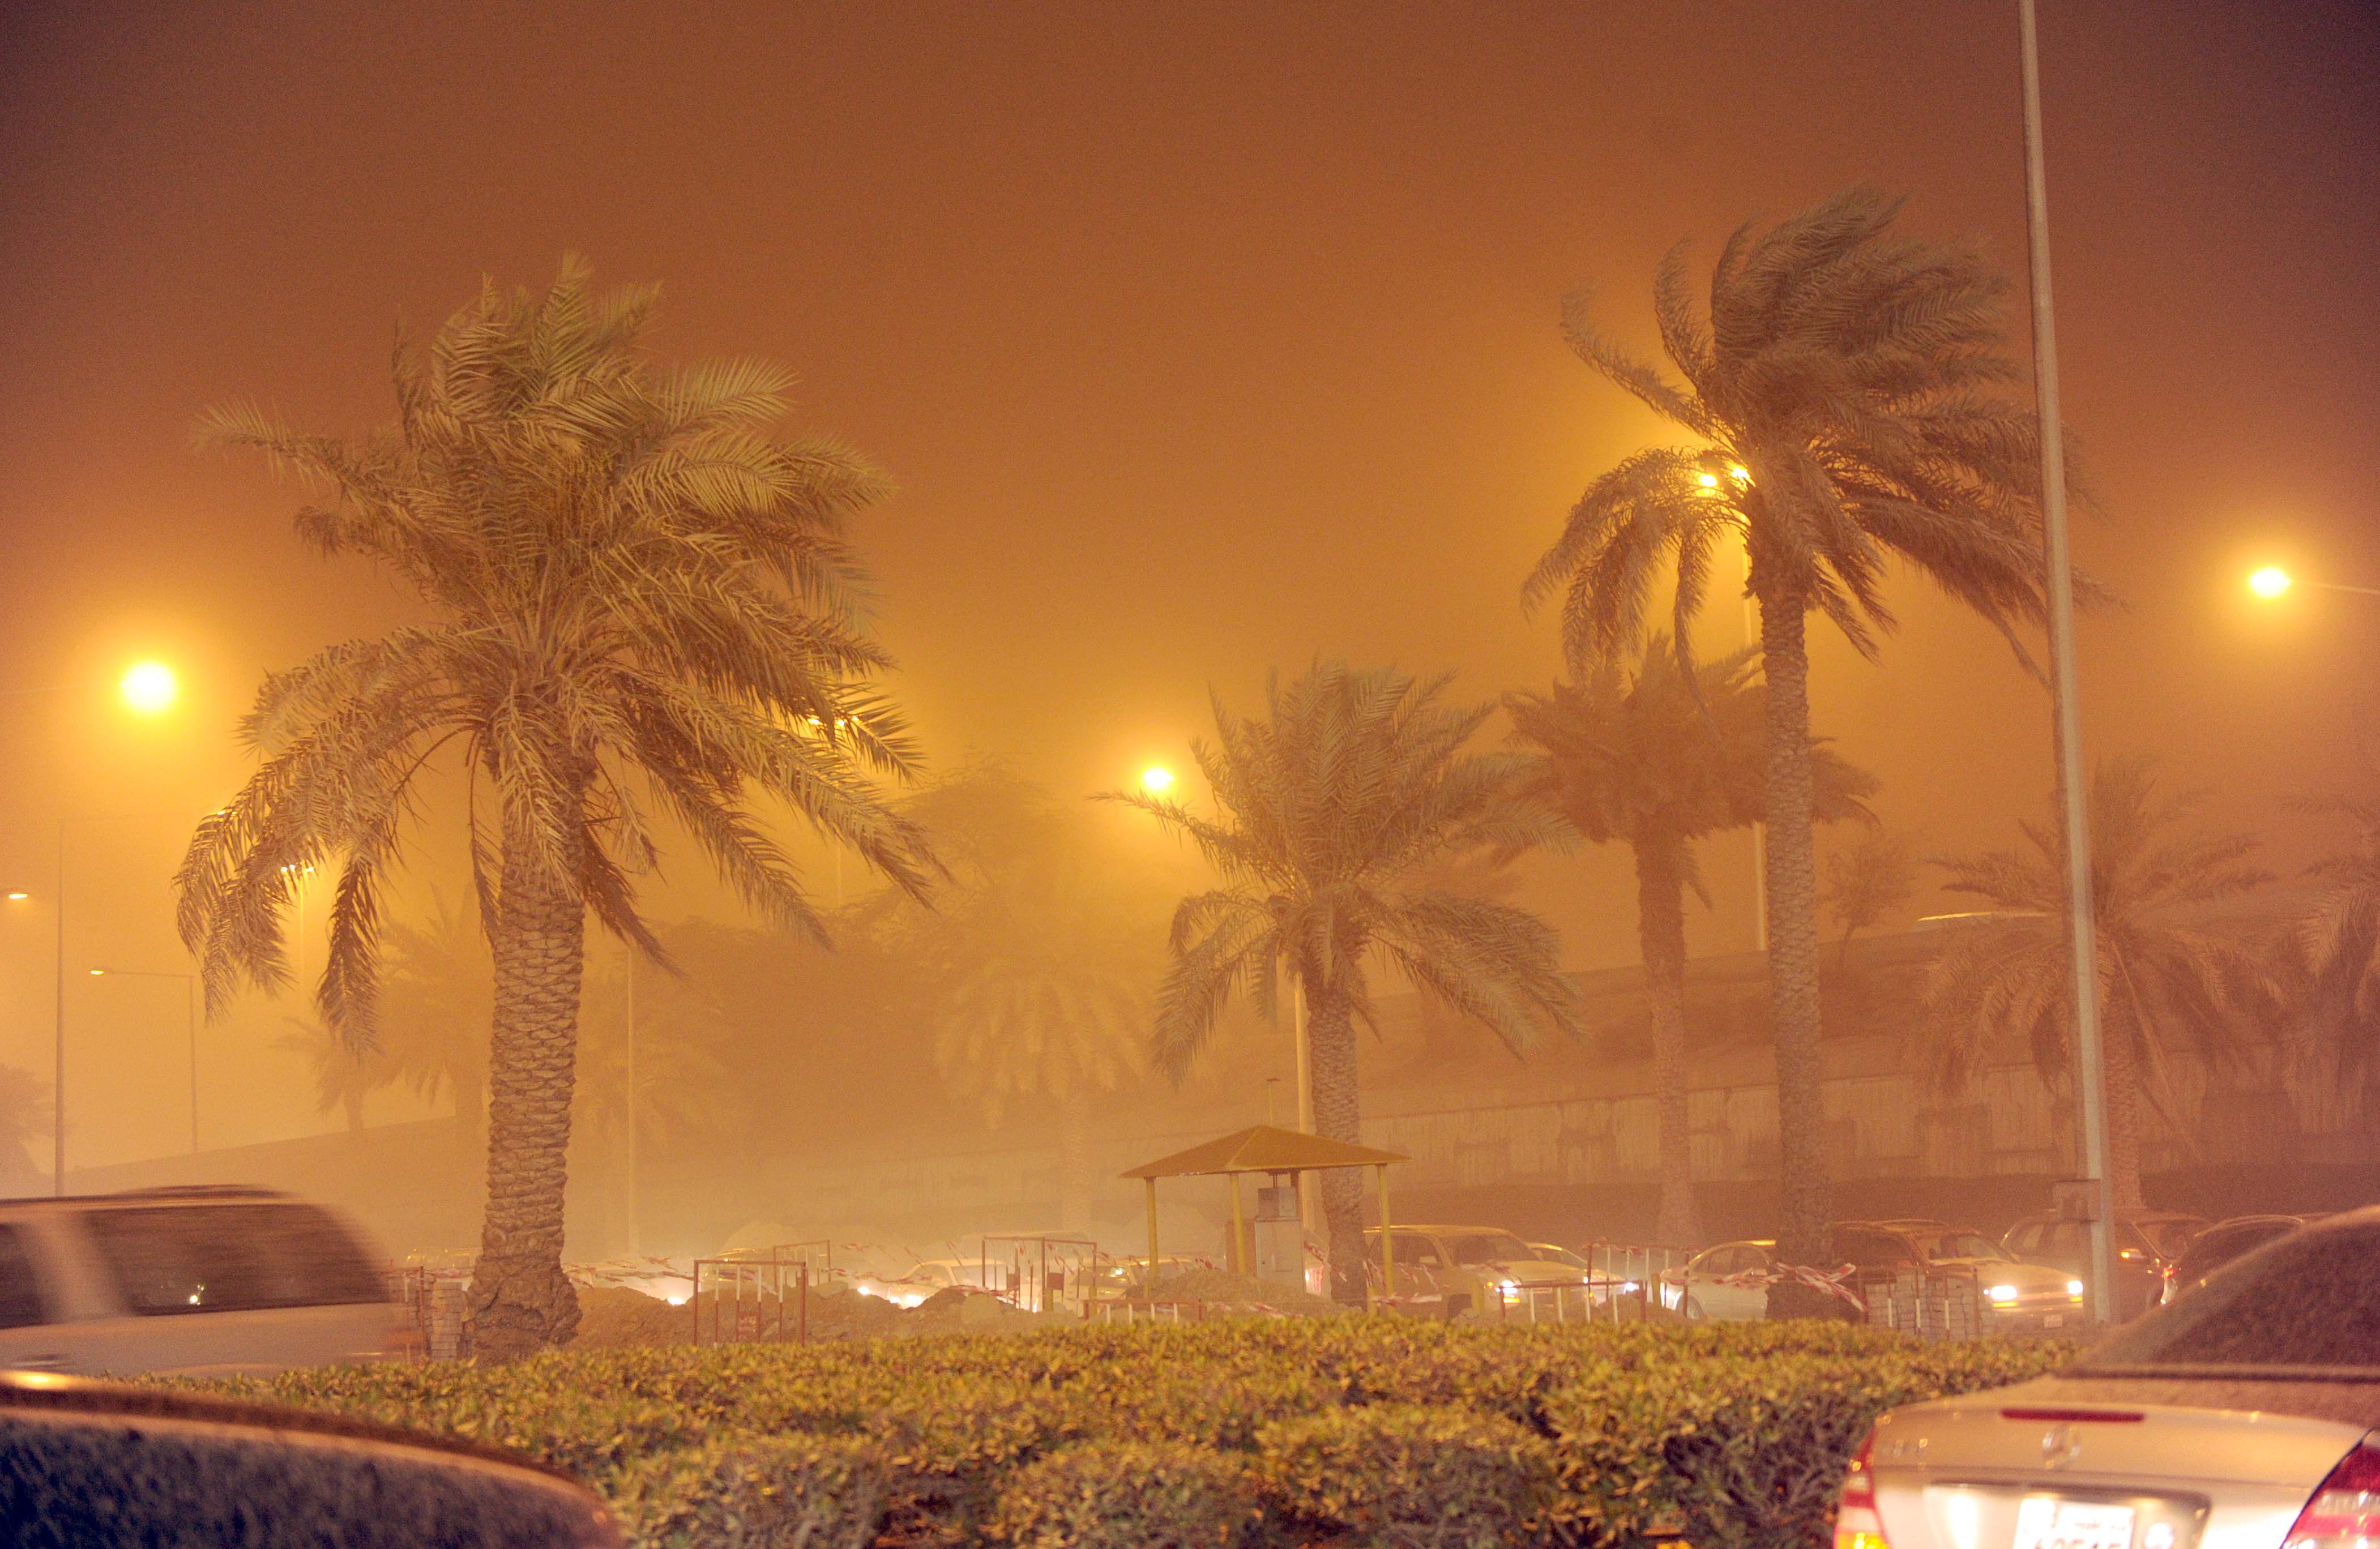 Kuwait's DGCA cautions of poor visibility